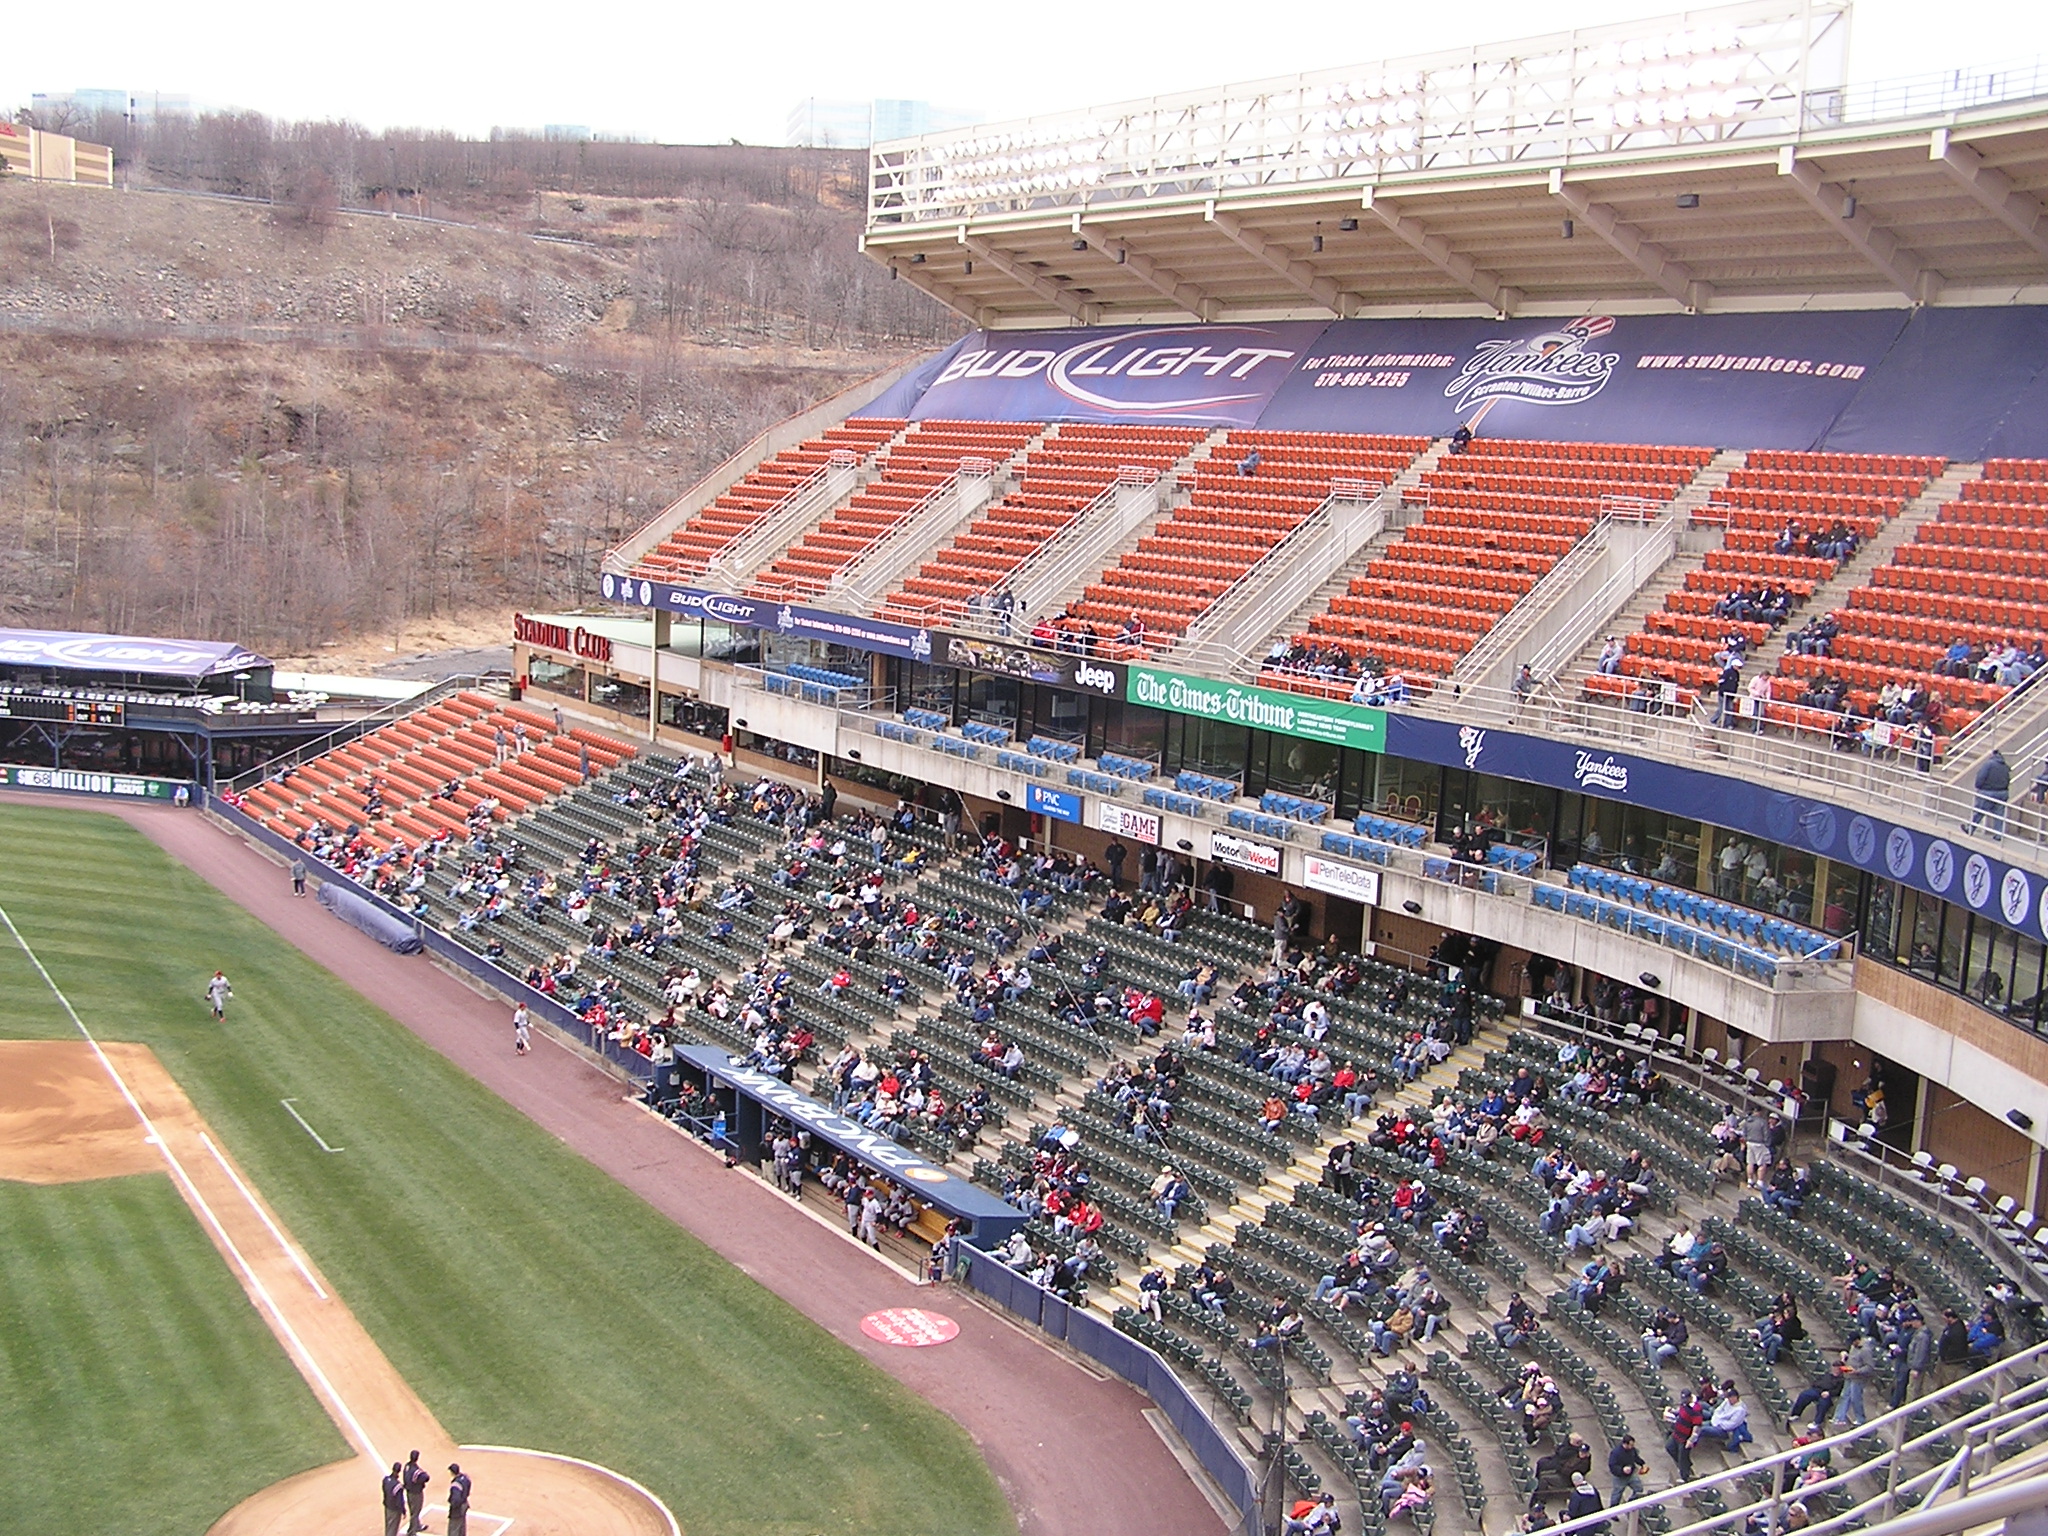 A final look at the stands - PNC Field